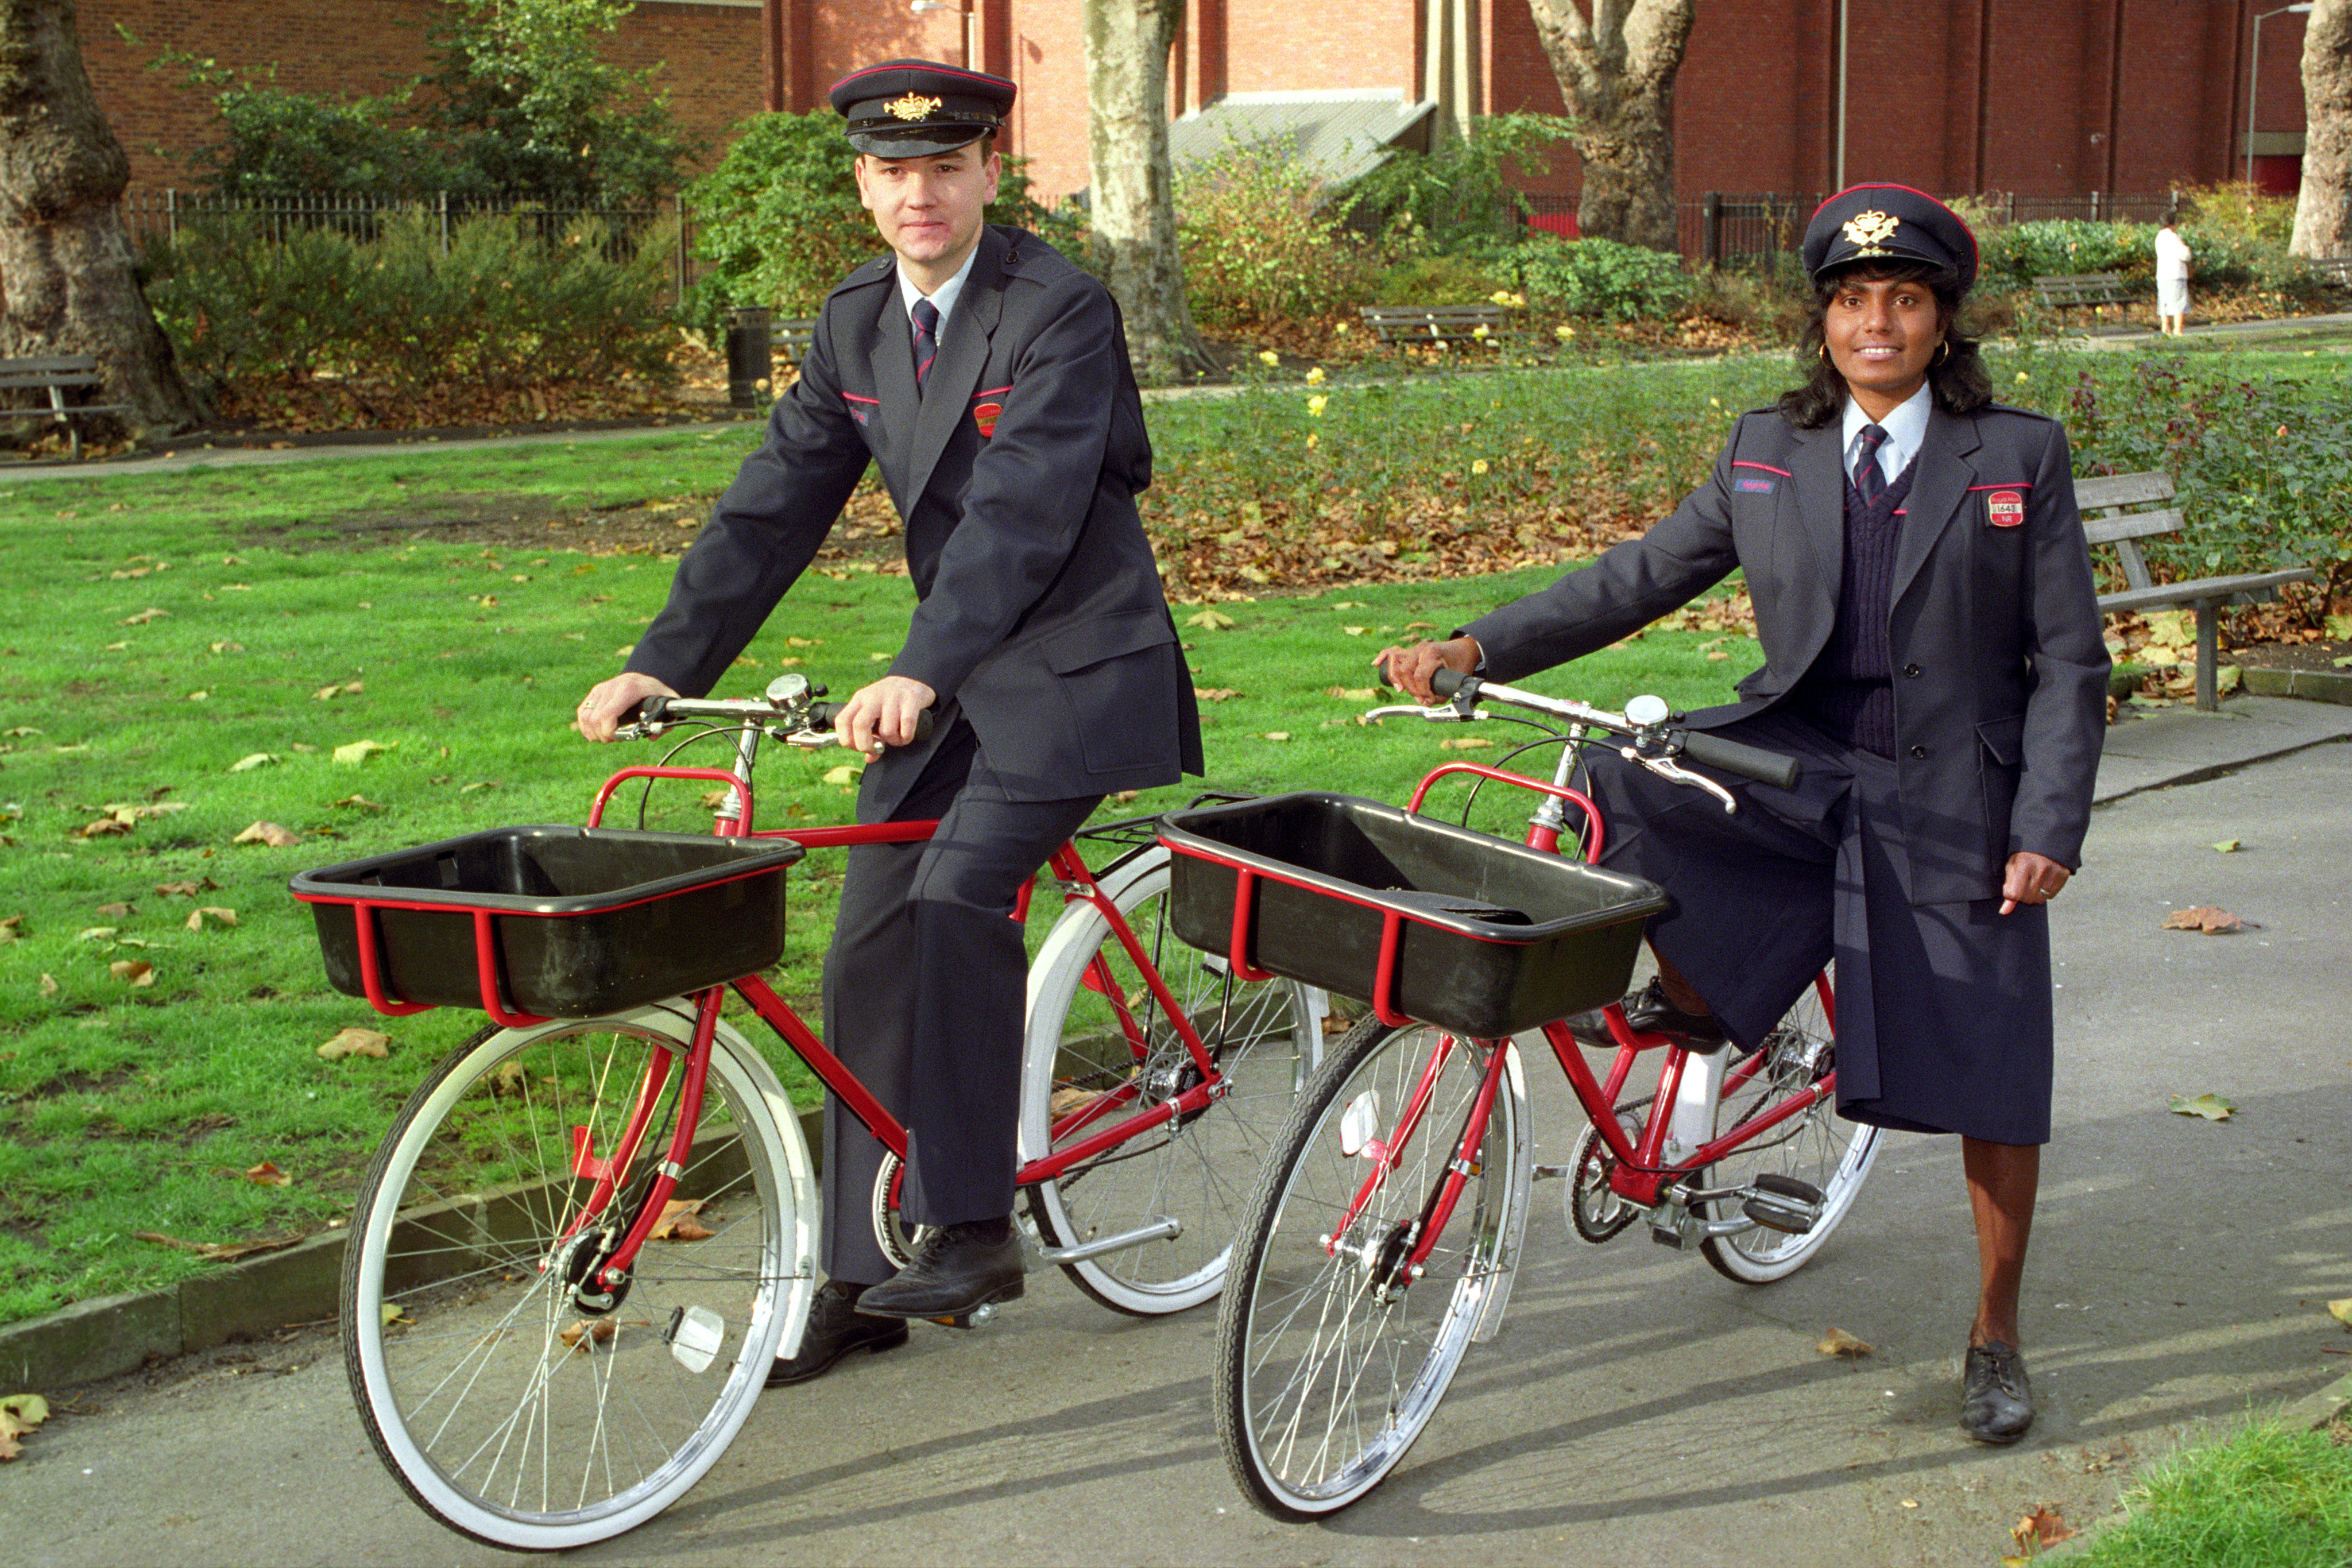 Two members of the Royal Mail test their new trial postal bikes in 1990